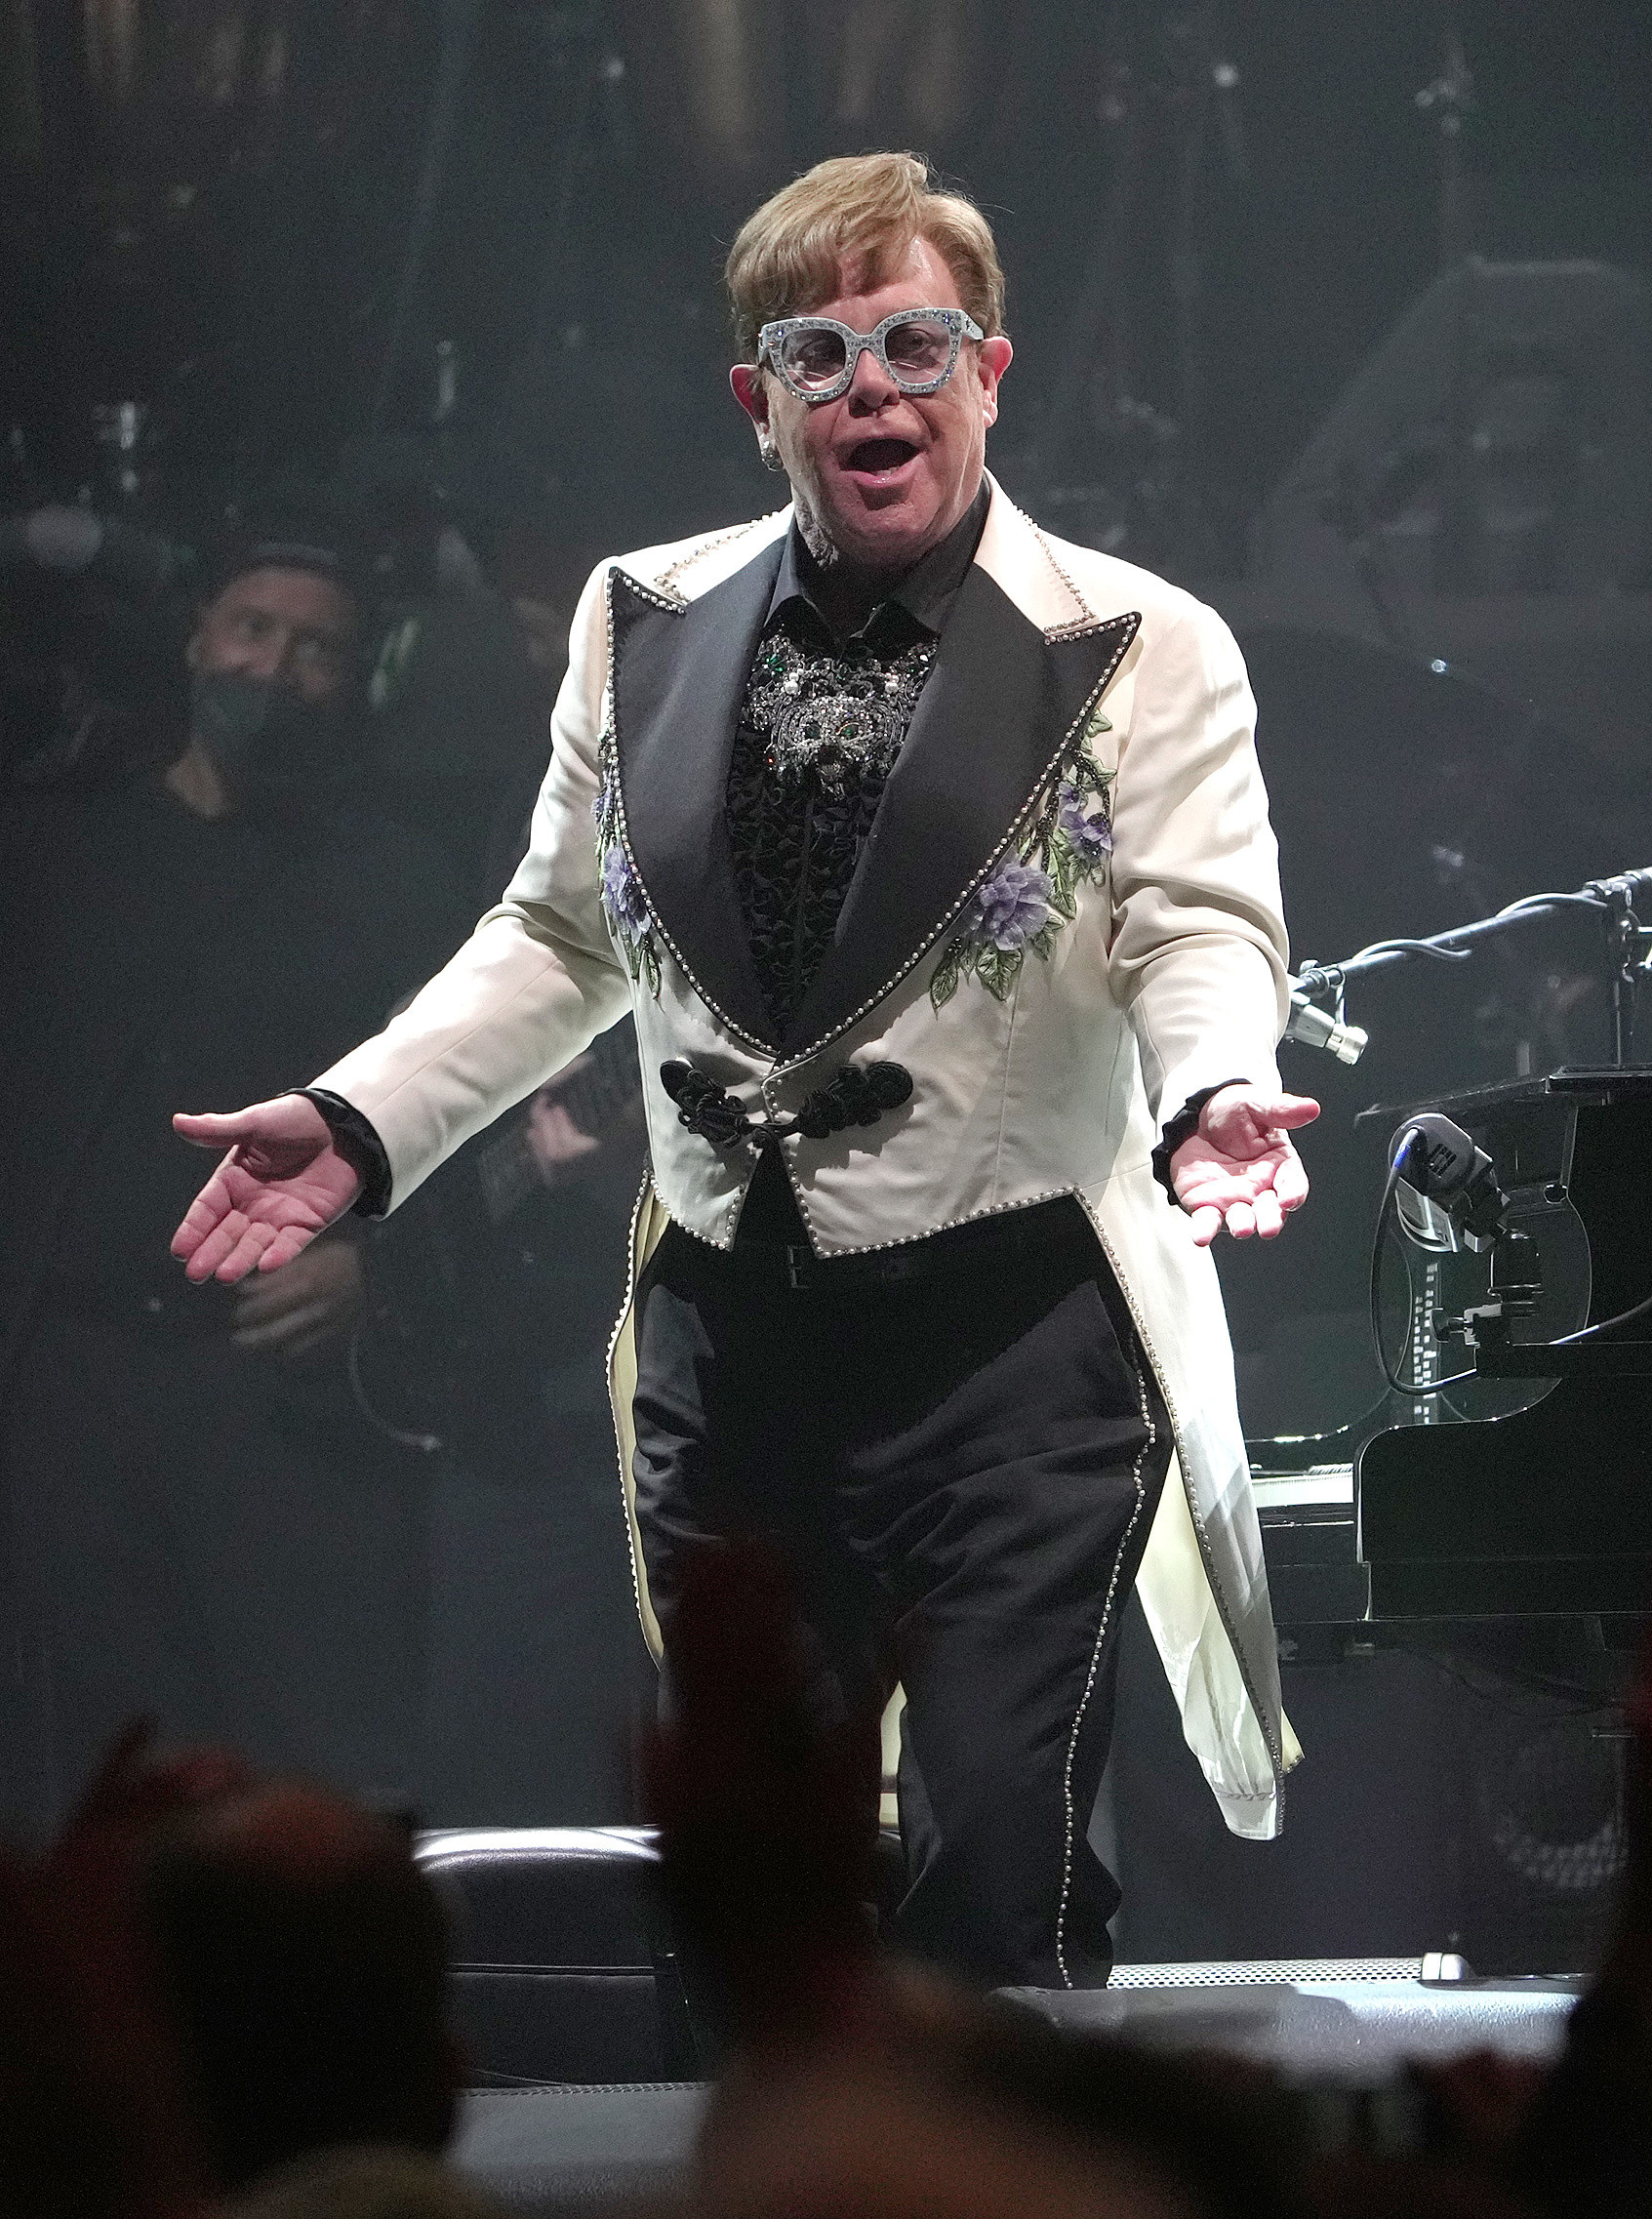 Elton John with his hands out in confusion while performing